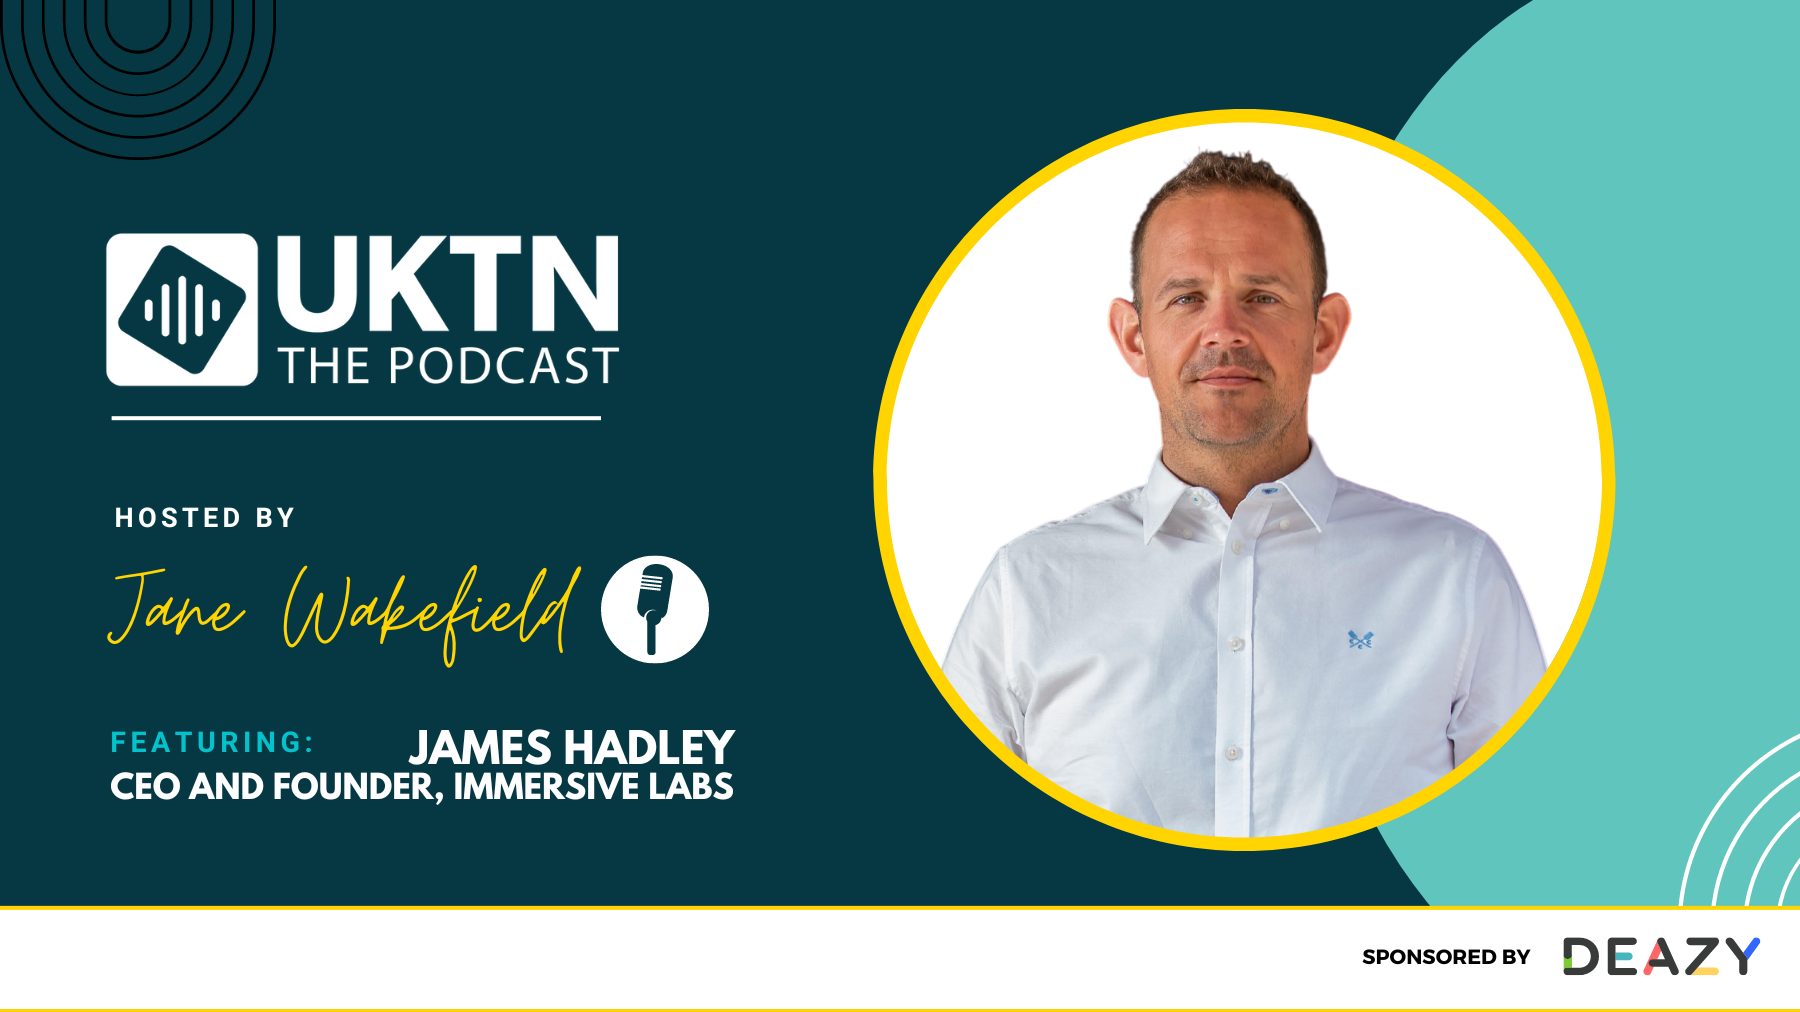 UKTN Podcast: Immersive Labs founder on the future of cyber skills